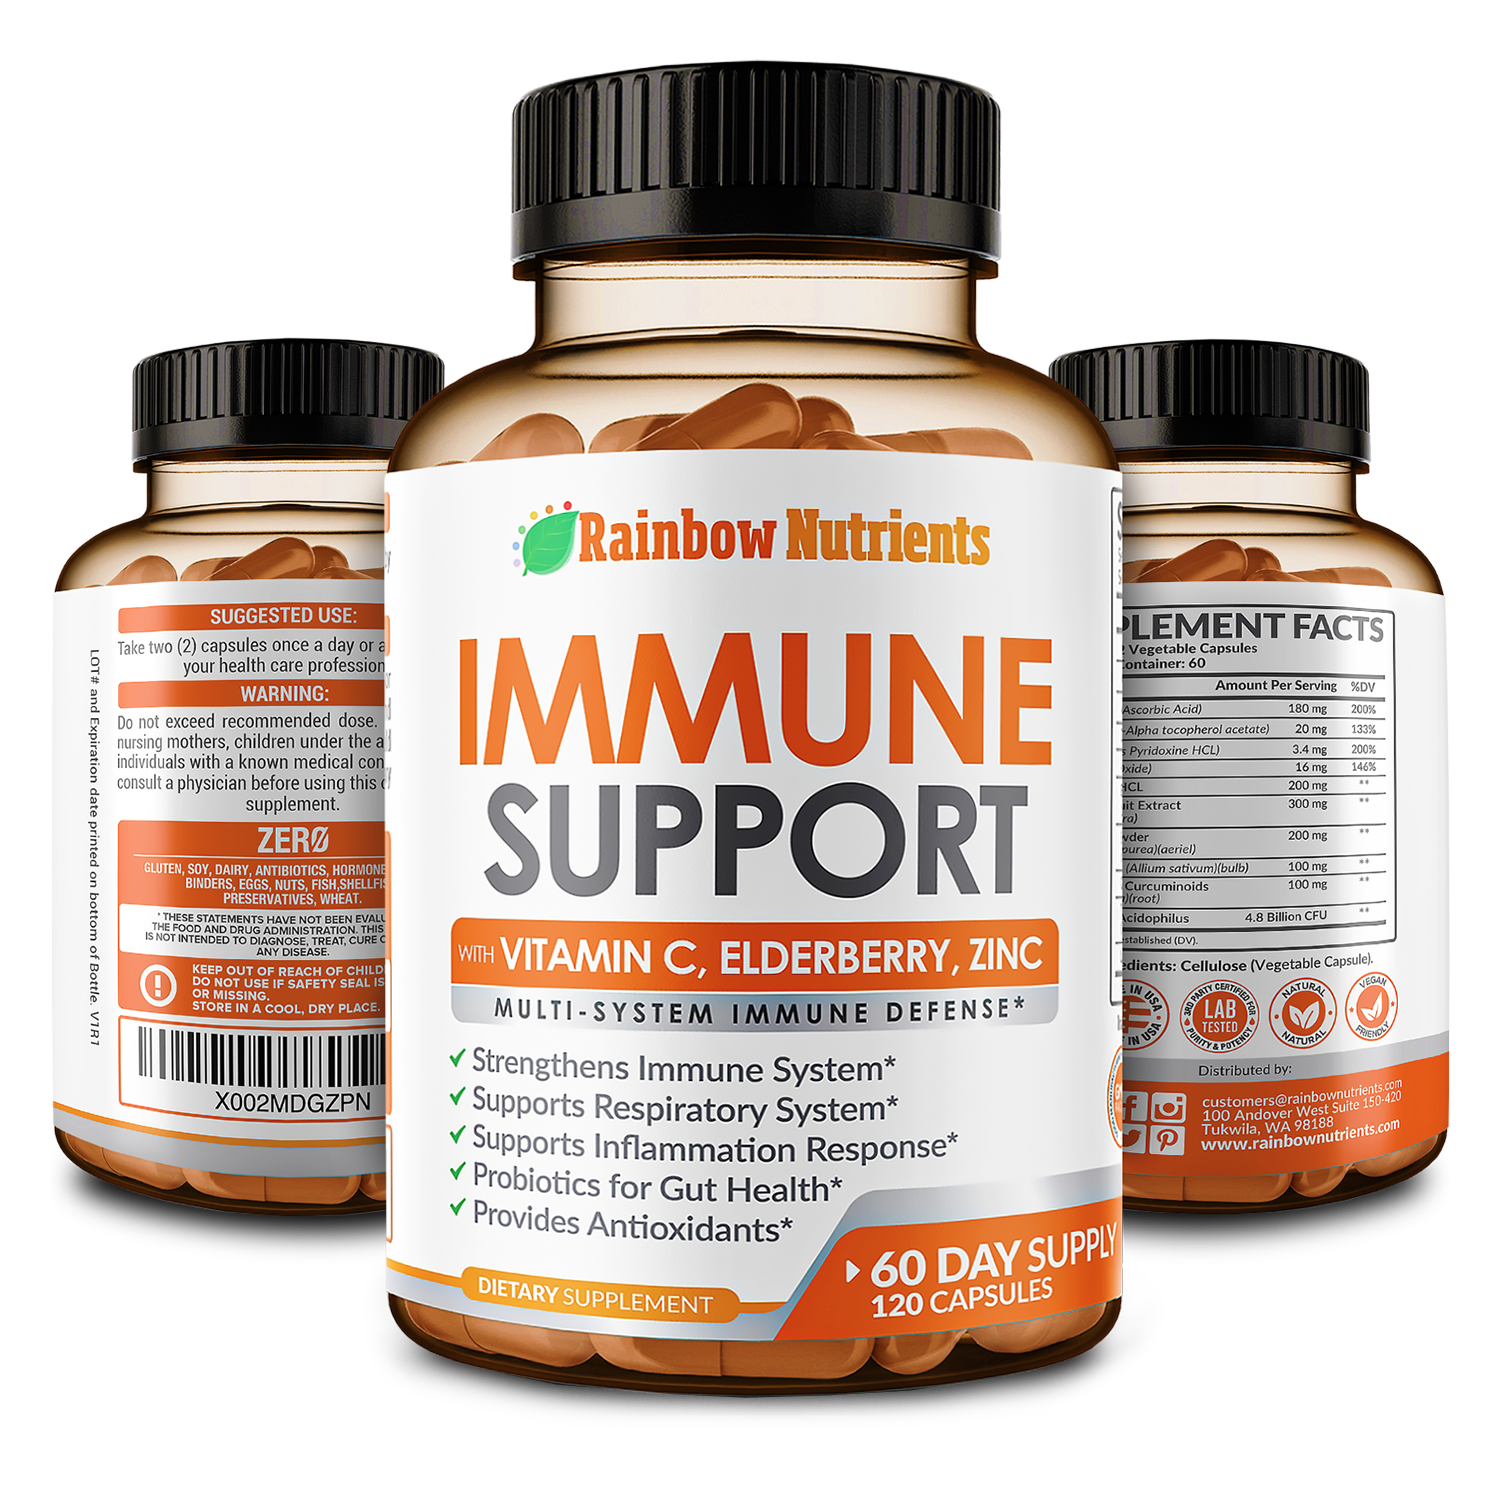 Immune Support bottle from all sides